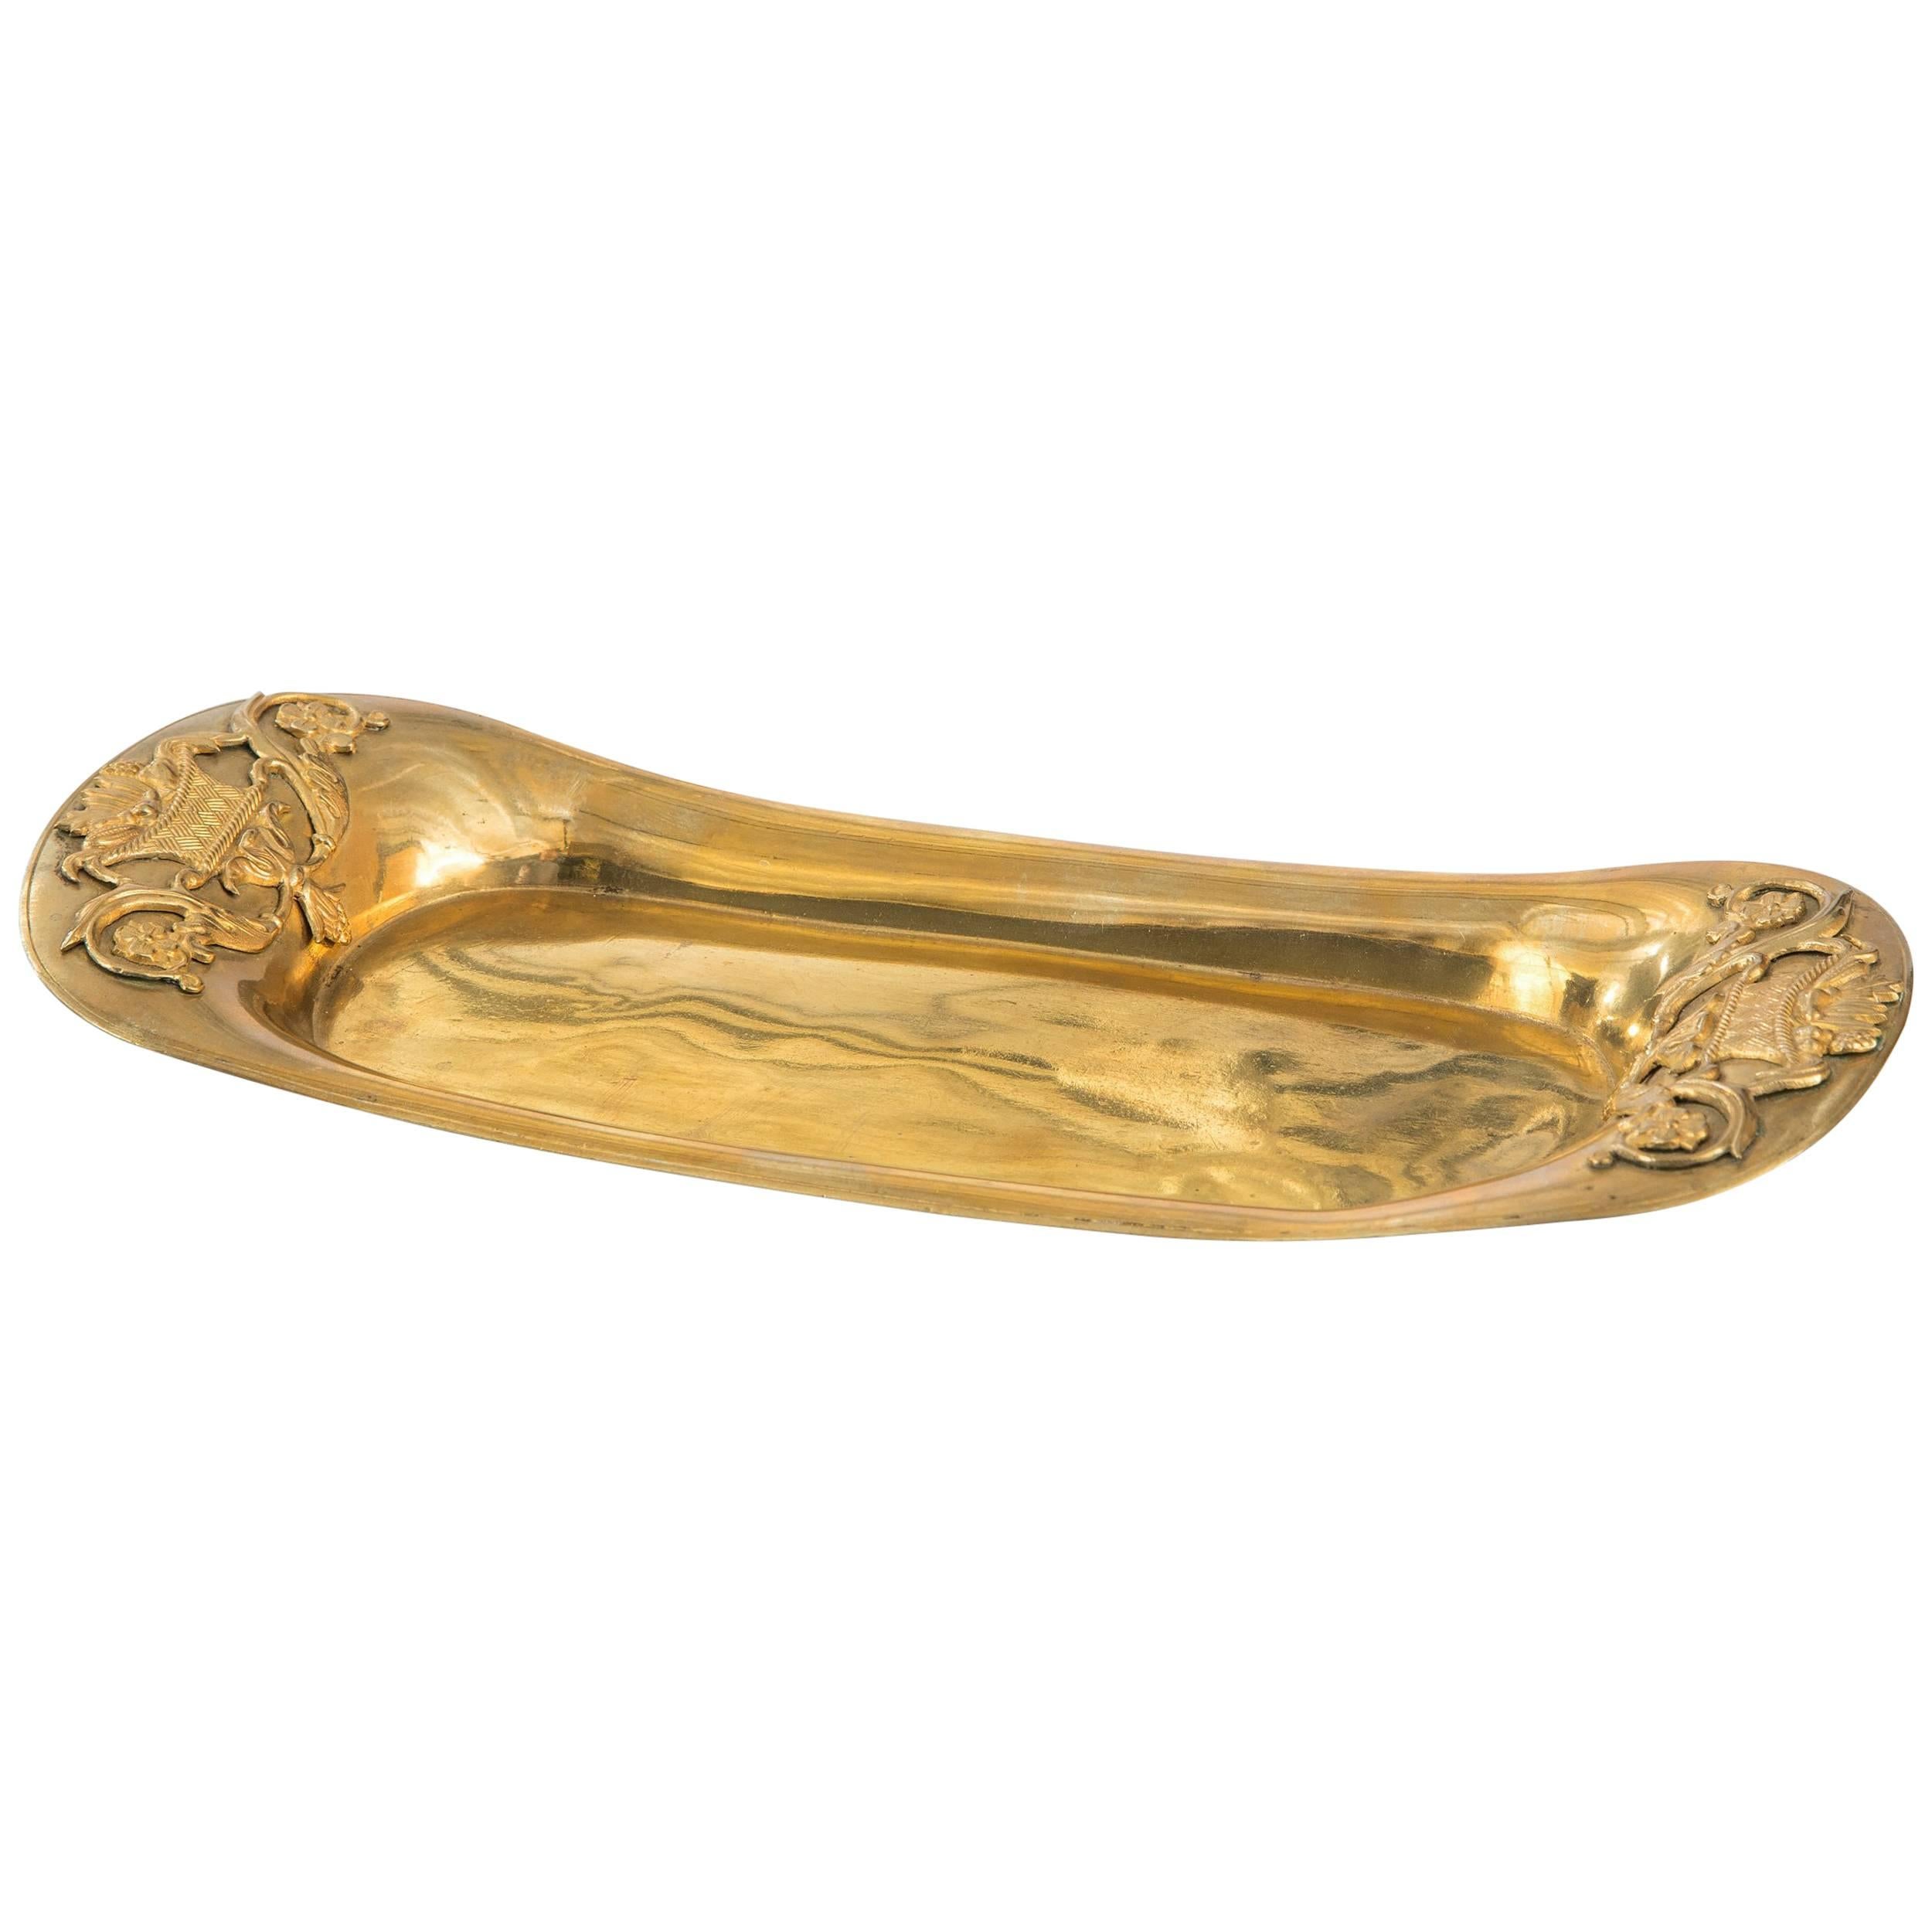 A Swedish Neoclassical Brass Pen Tray / Butter Dish